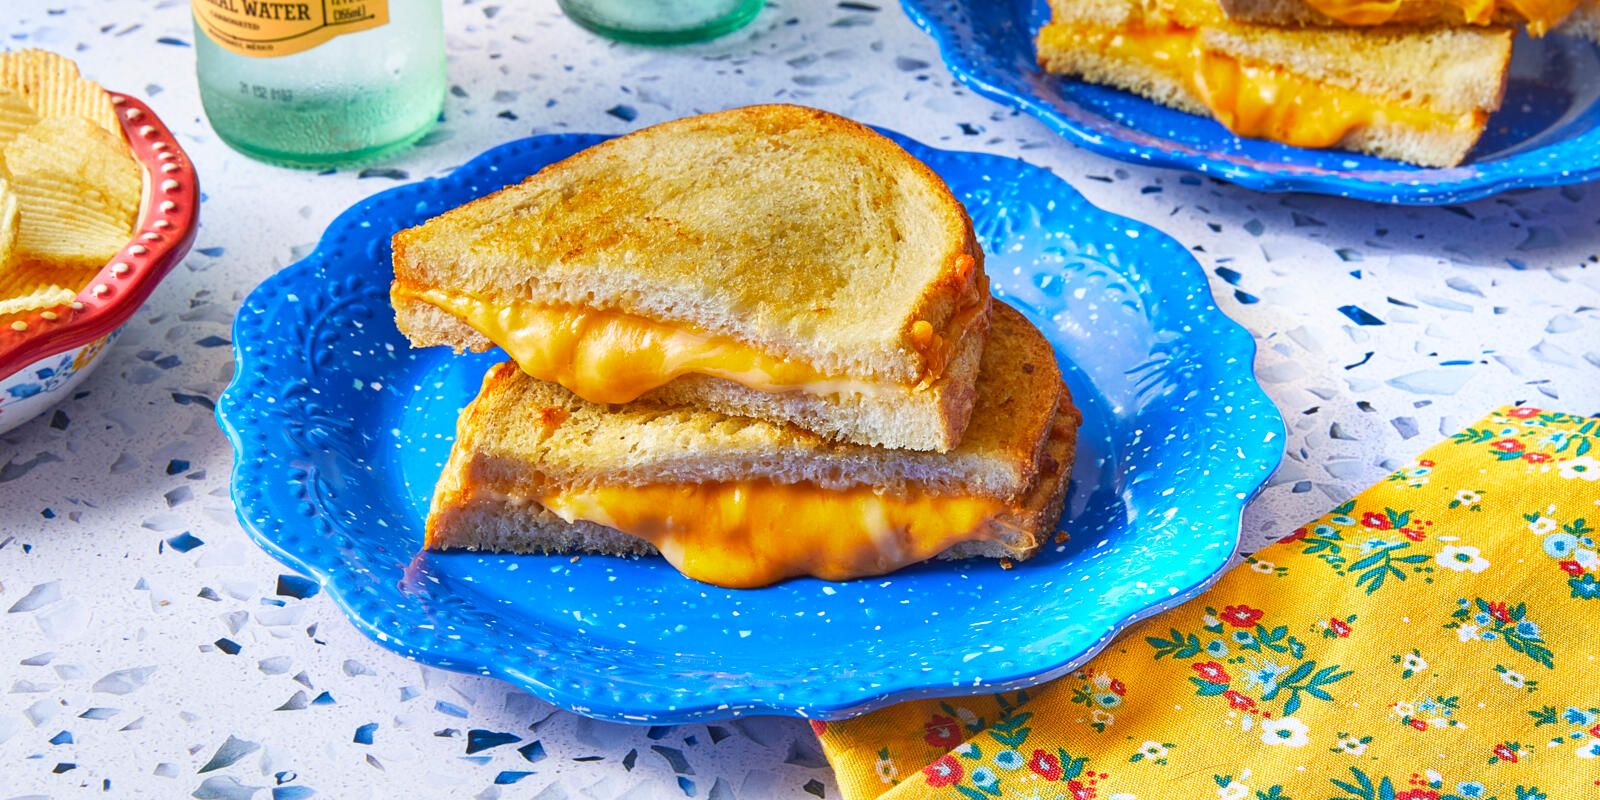 Grilled Cheese Sandwich Recipe (VIDEO) 